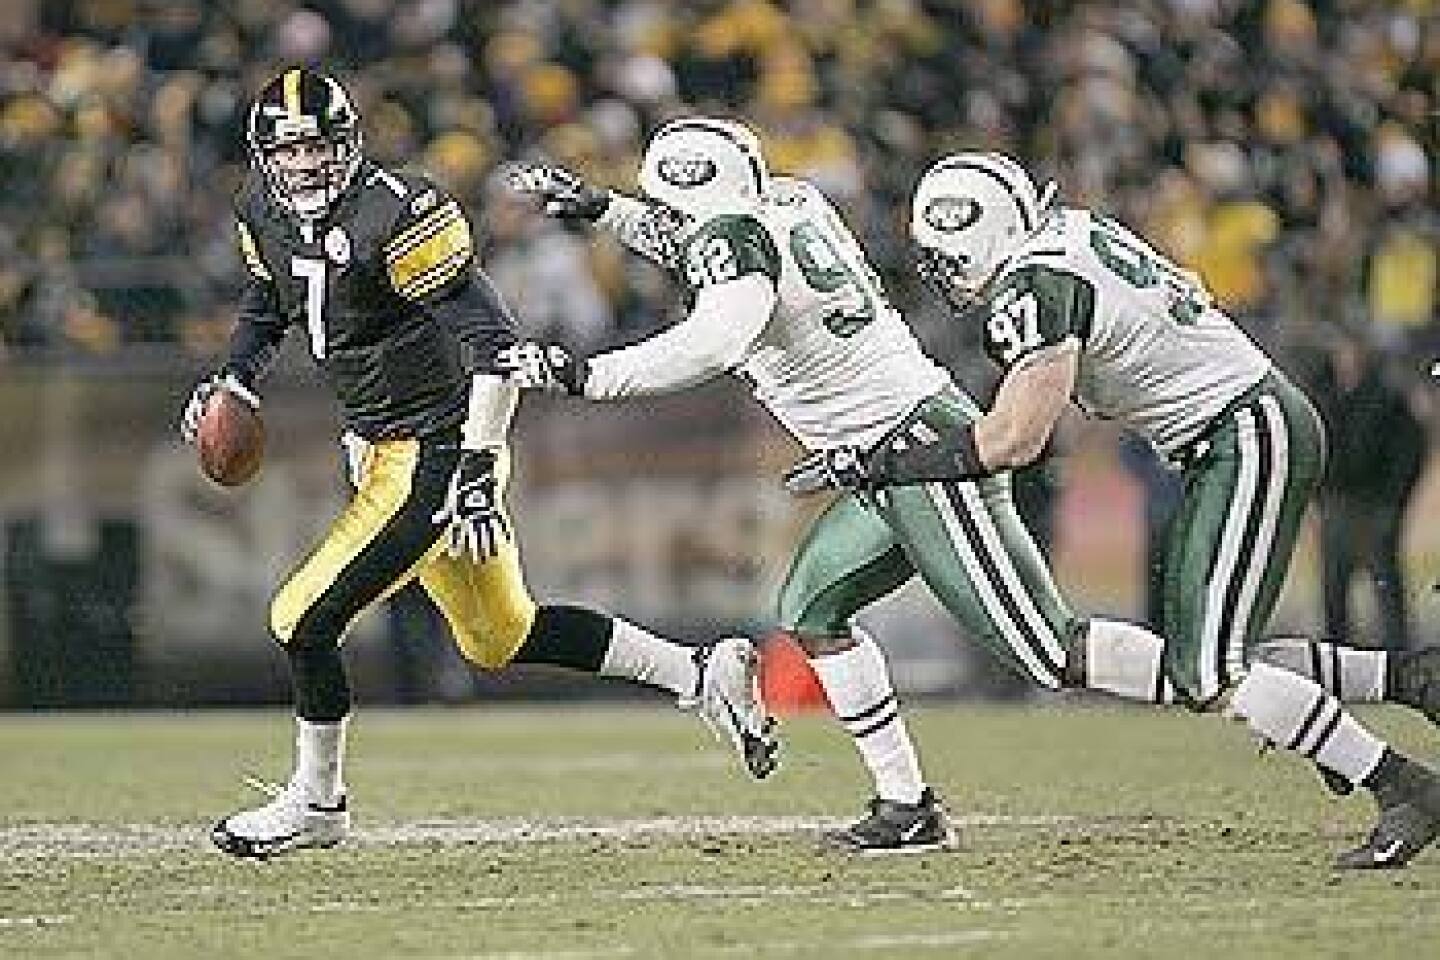 Michael Vick says he held back because he embarrassed defenders so